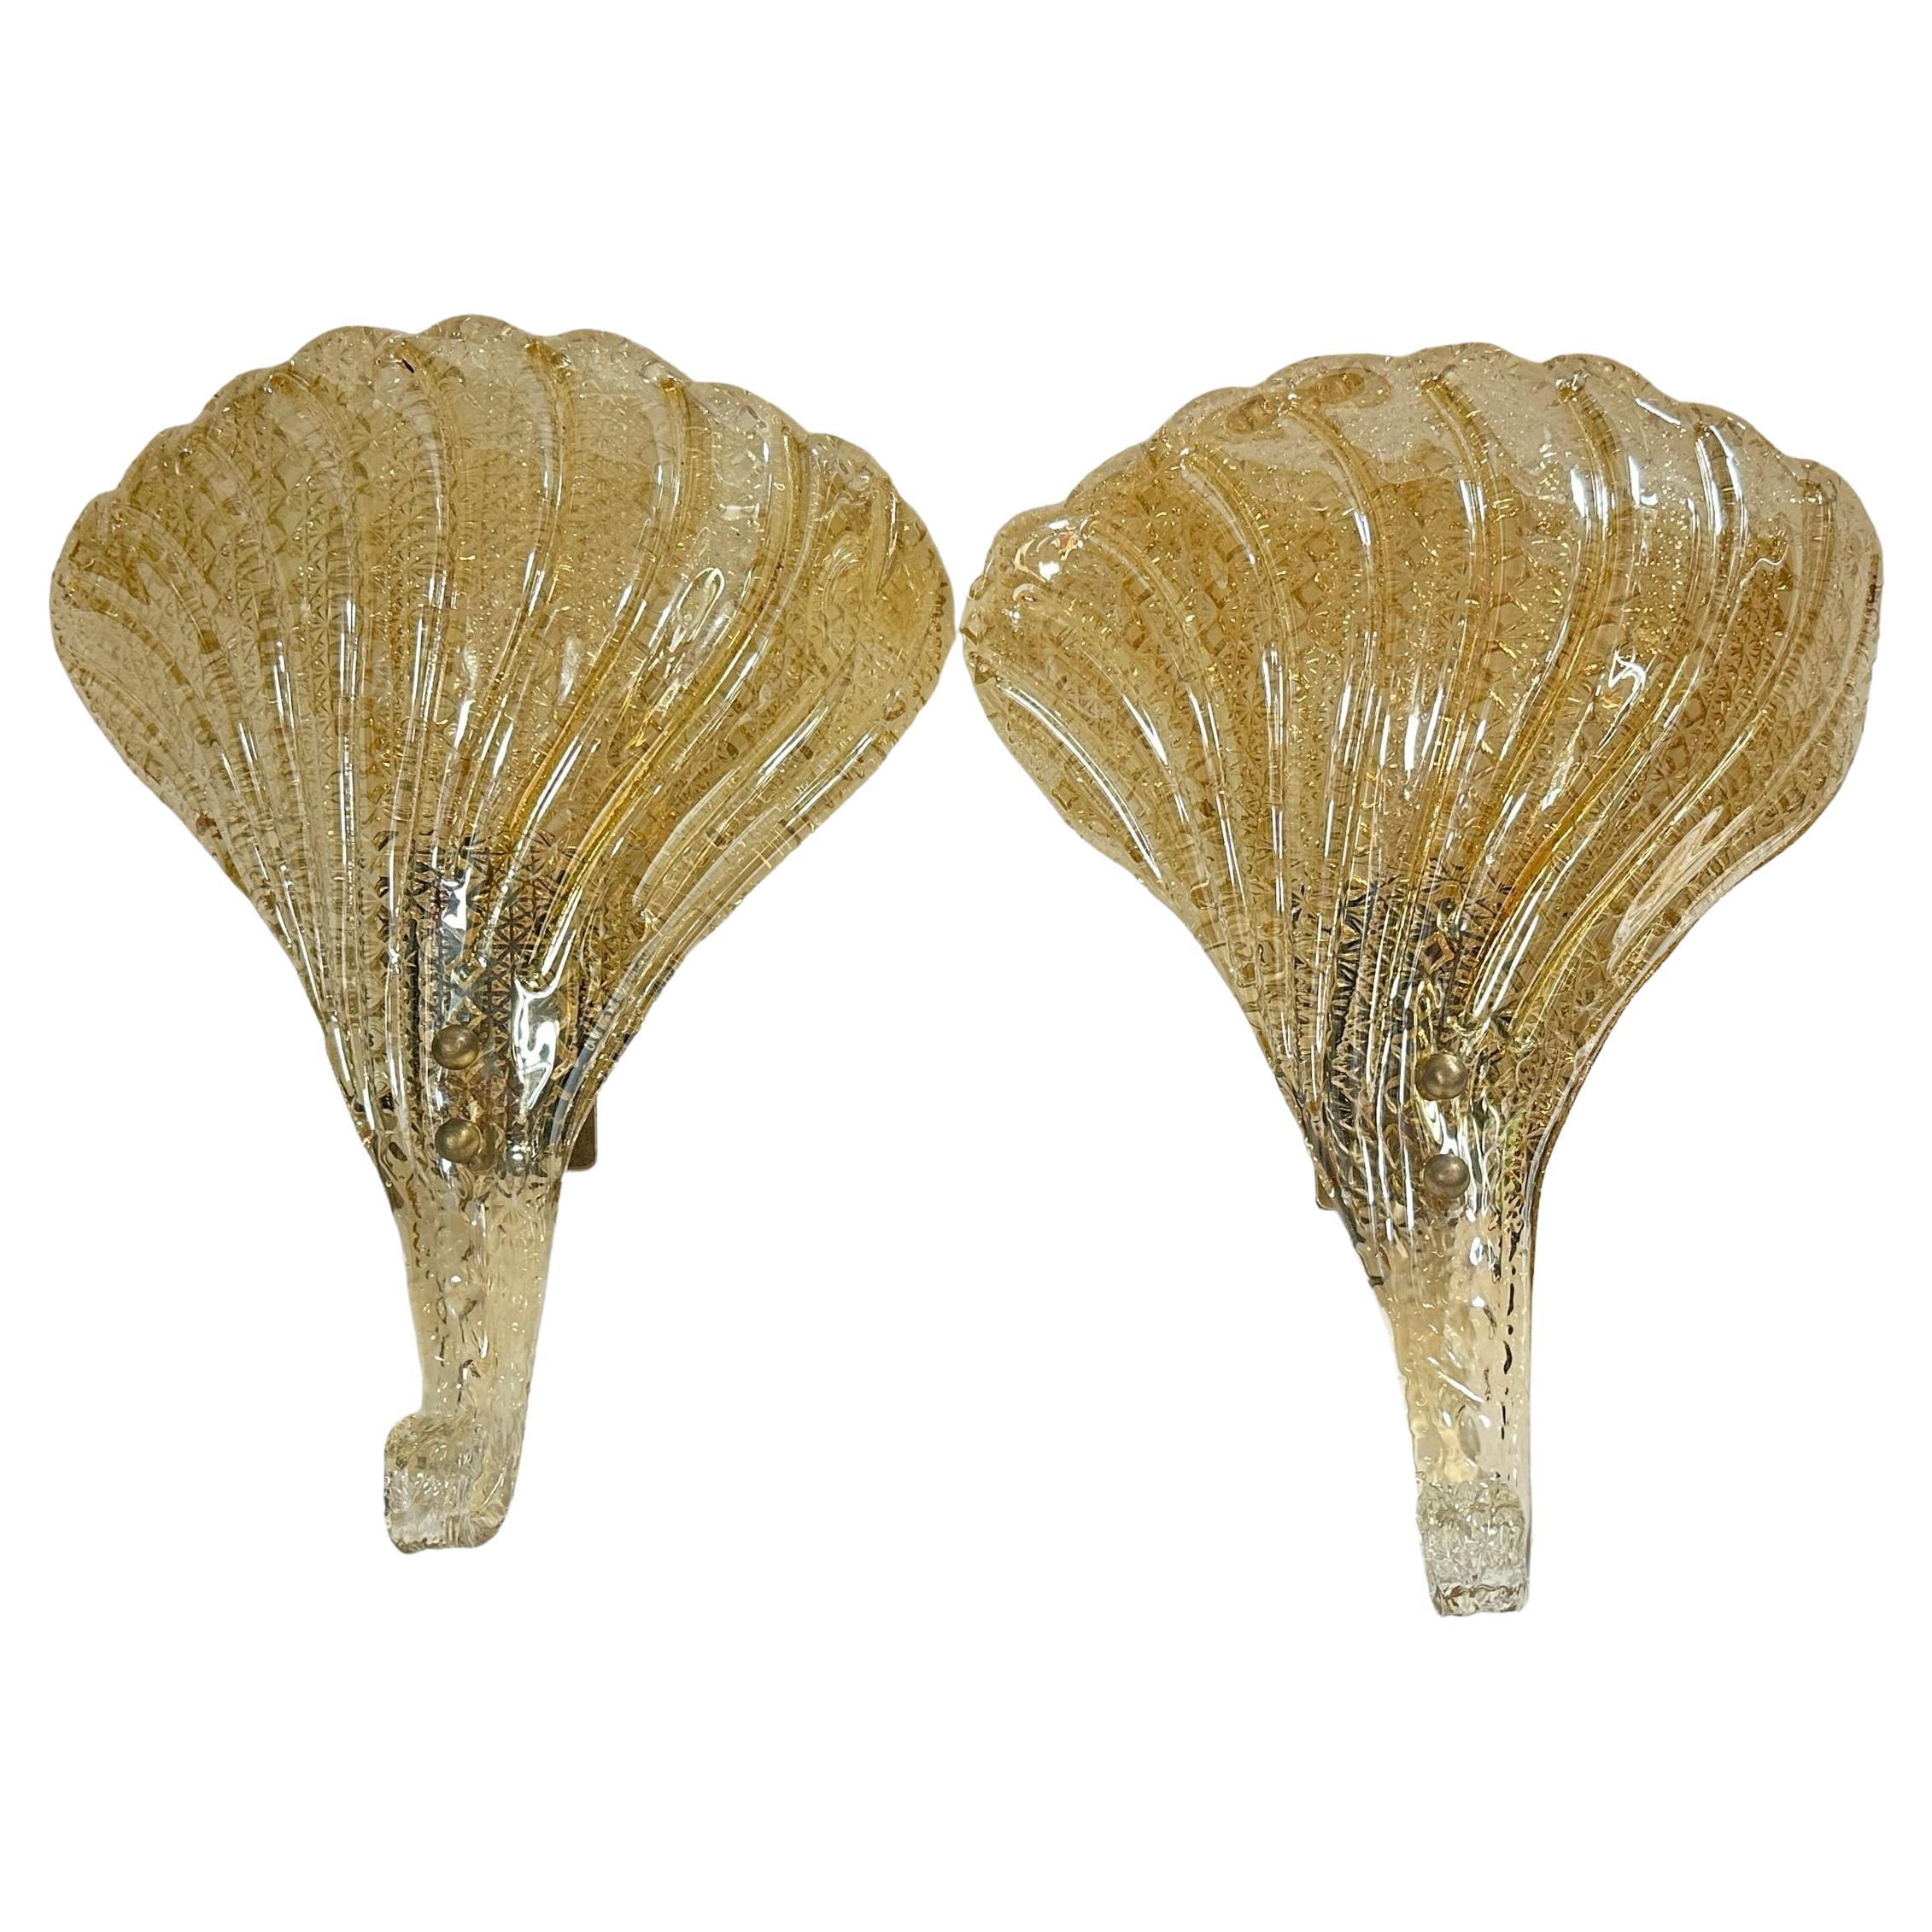 Stunning Pair of Murano Glass Leaf Sconces by Barovier and Toso, Italy For Sale